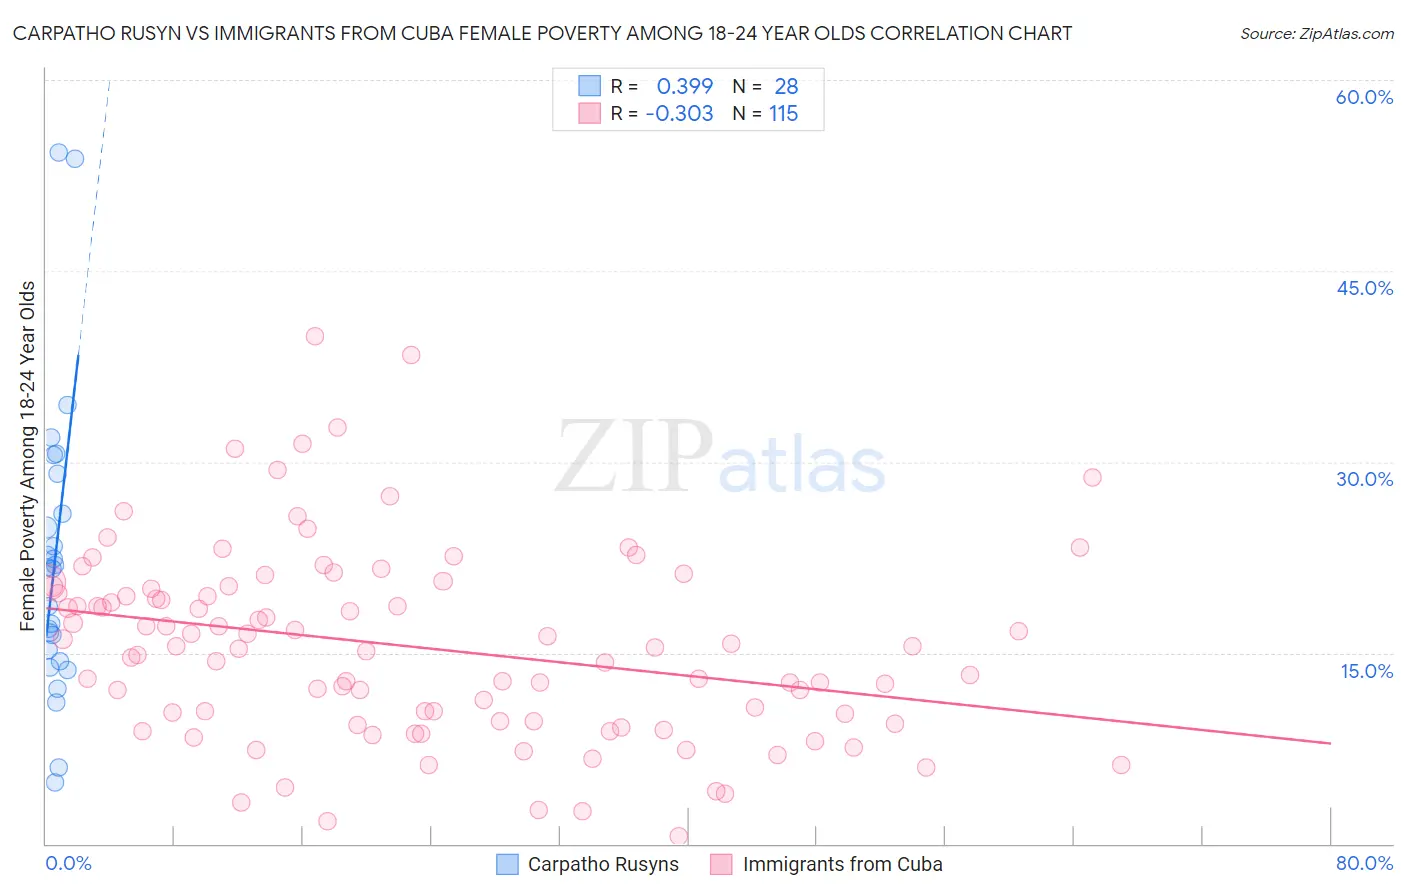 Carpatho Rusyn vs Immigrants from Cuba Female Poverty Among 18-24 Year Olds